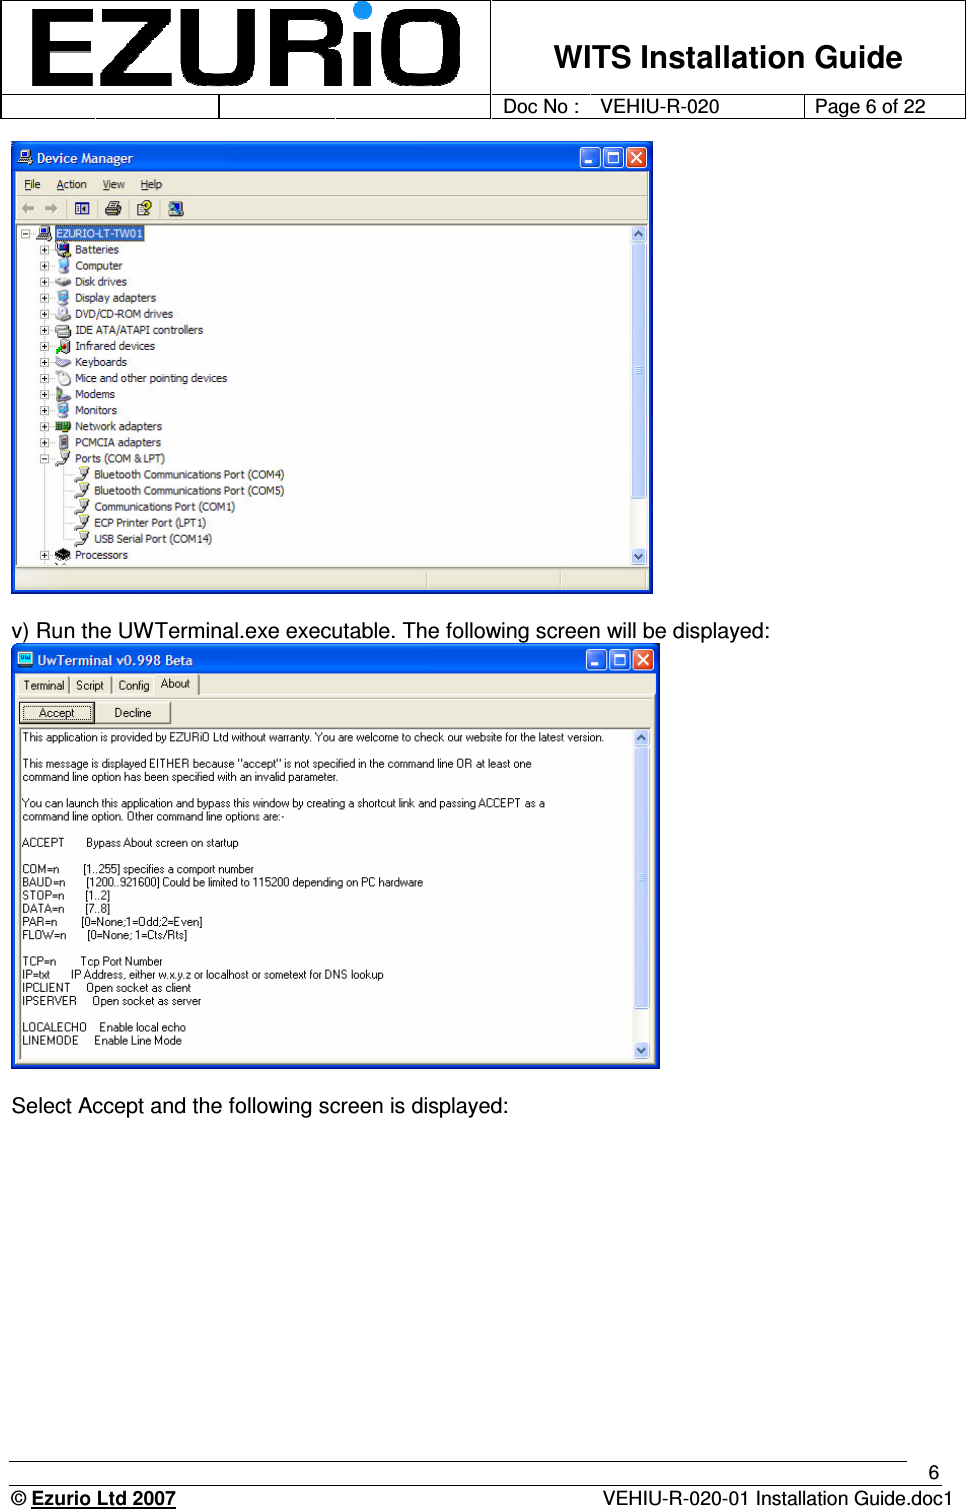    WITS Installation Guide         Doc No : VEHIU-R-020 Page 6 of 22      © Ezurio Ltd 2007  VEHIU-R-020-01 Installation Guide.doc1 6   v) Run the UWTerminal.exe executable. The following screen will be displayed:   Select Accept and the following screen is displayed: 